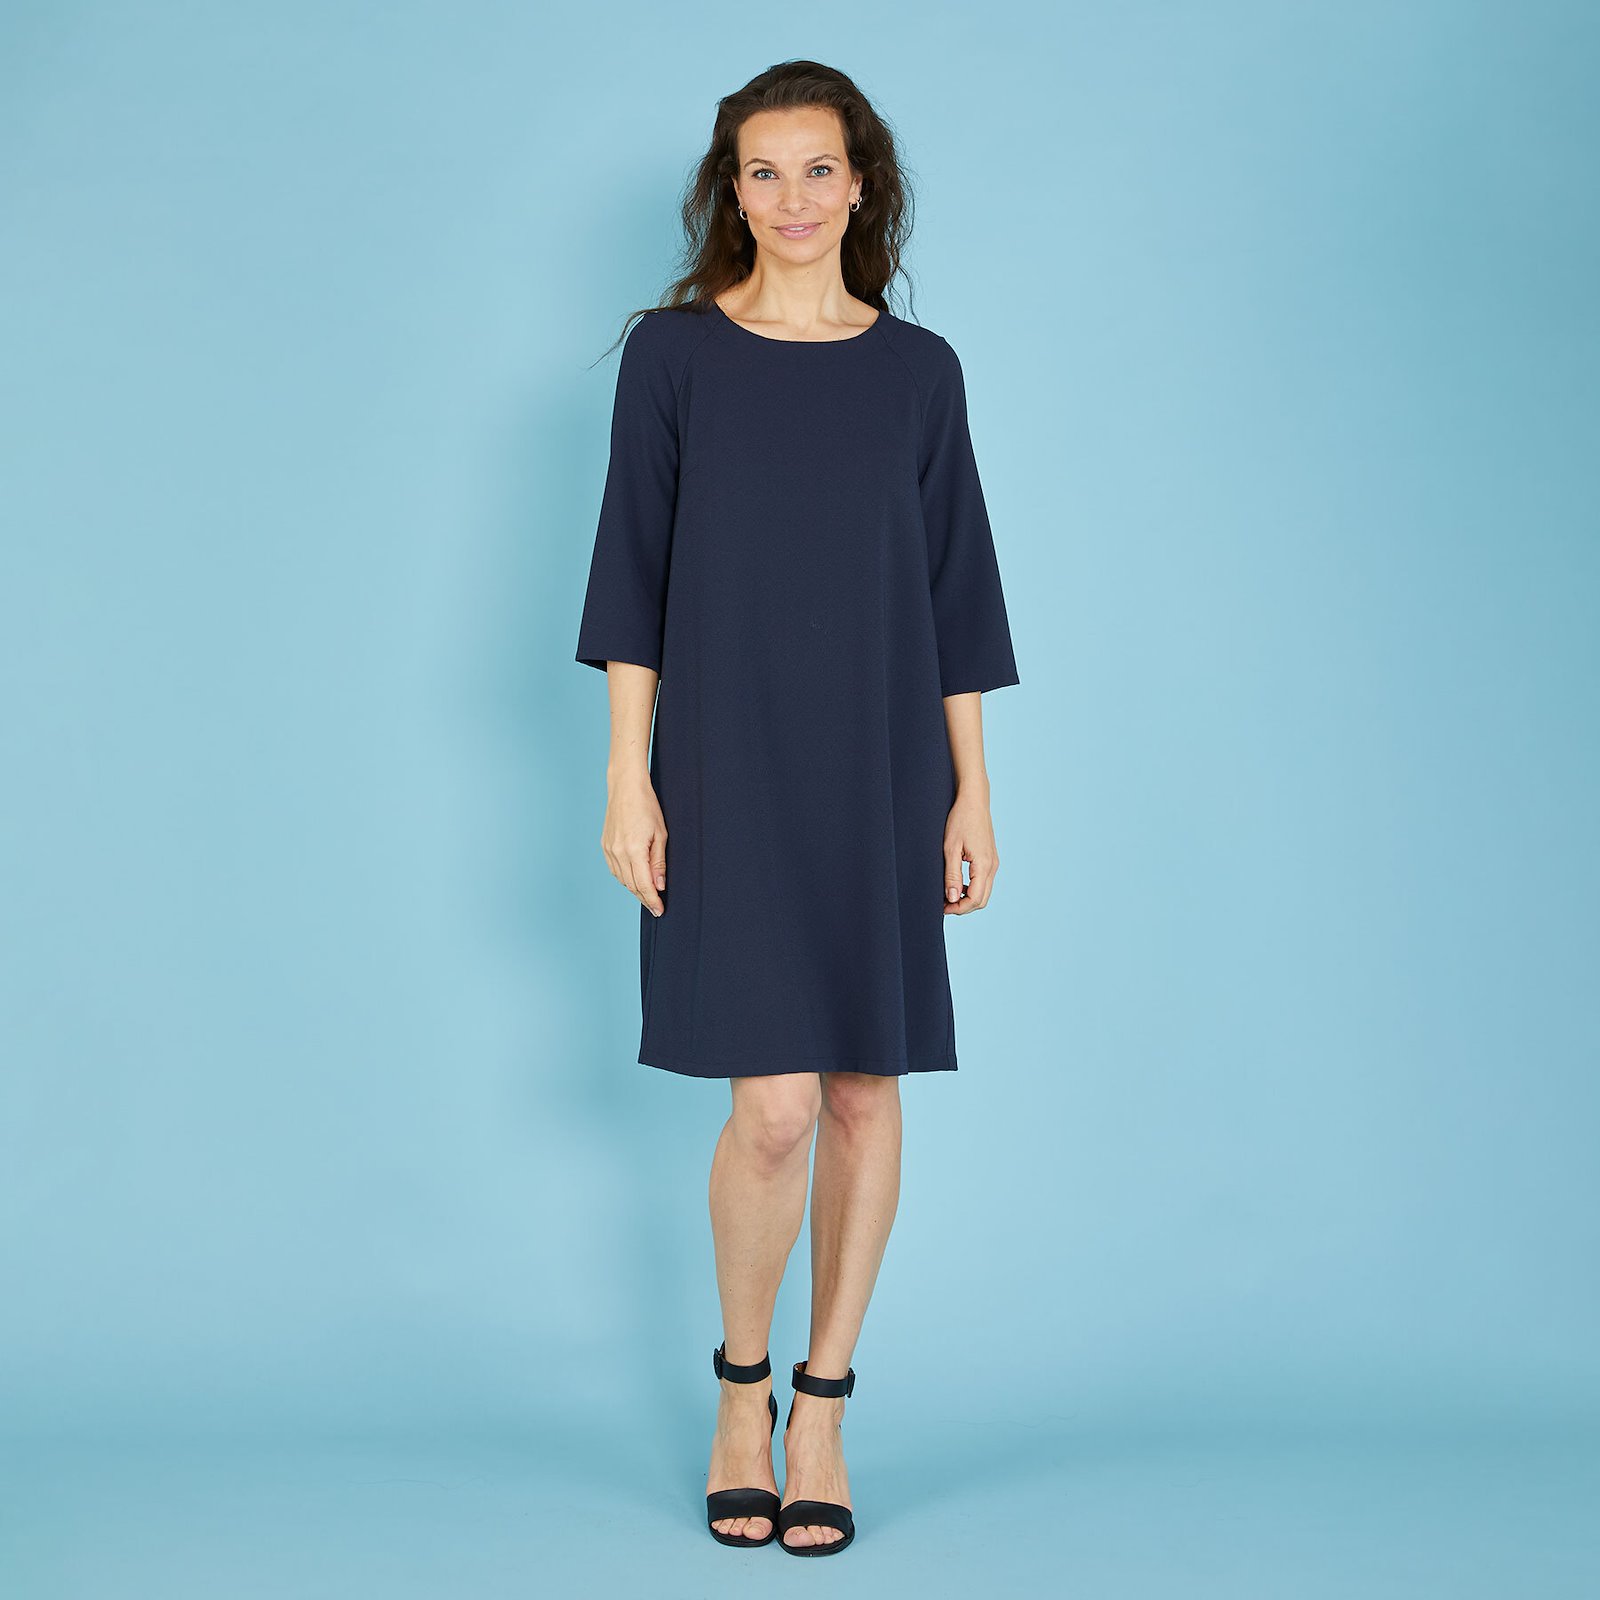 Dress with A-shape and raglan sle, 42/14 p23175000_p23175001_p23175002_p23175003_p23175004_pack_d